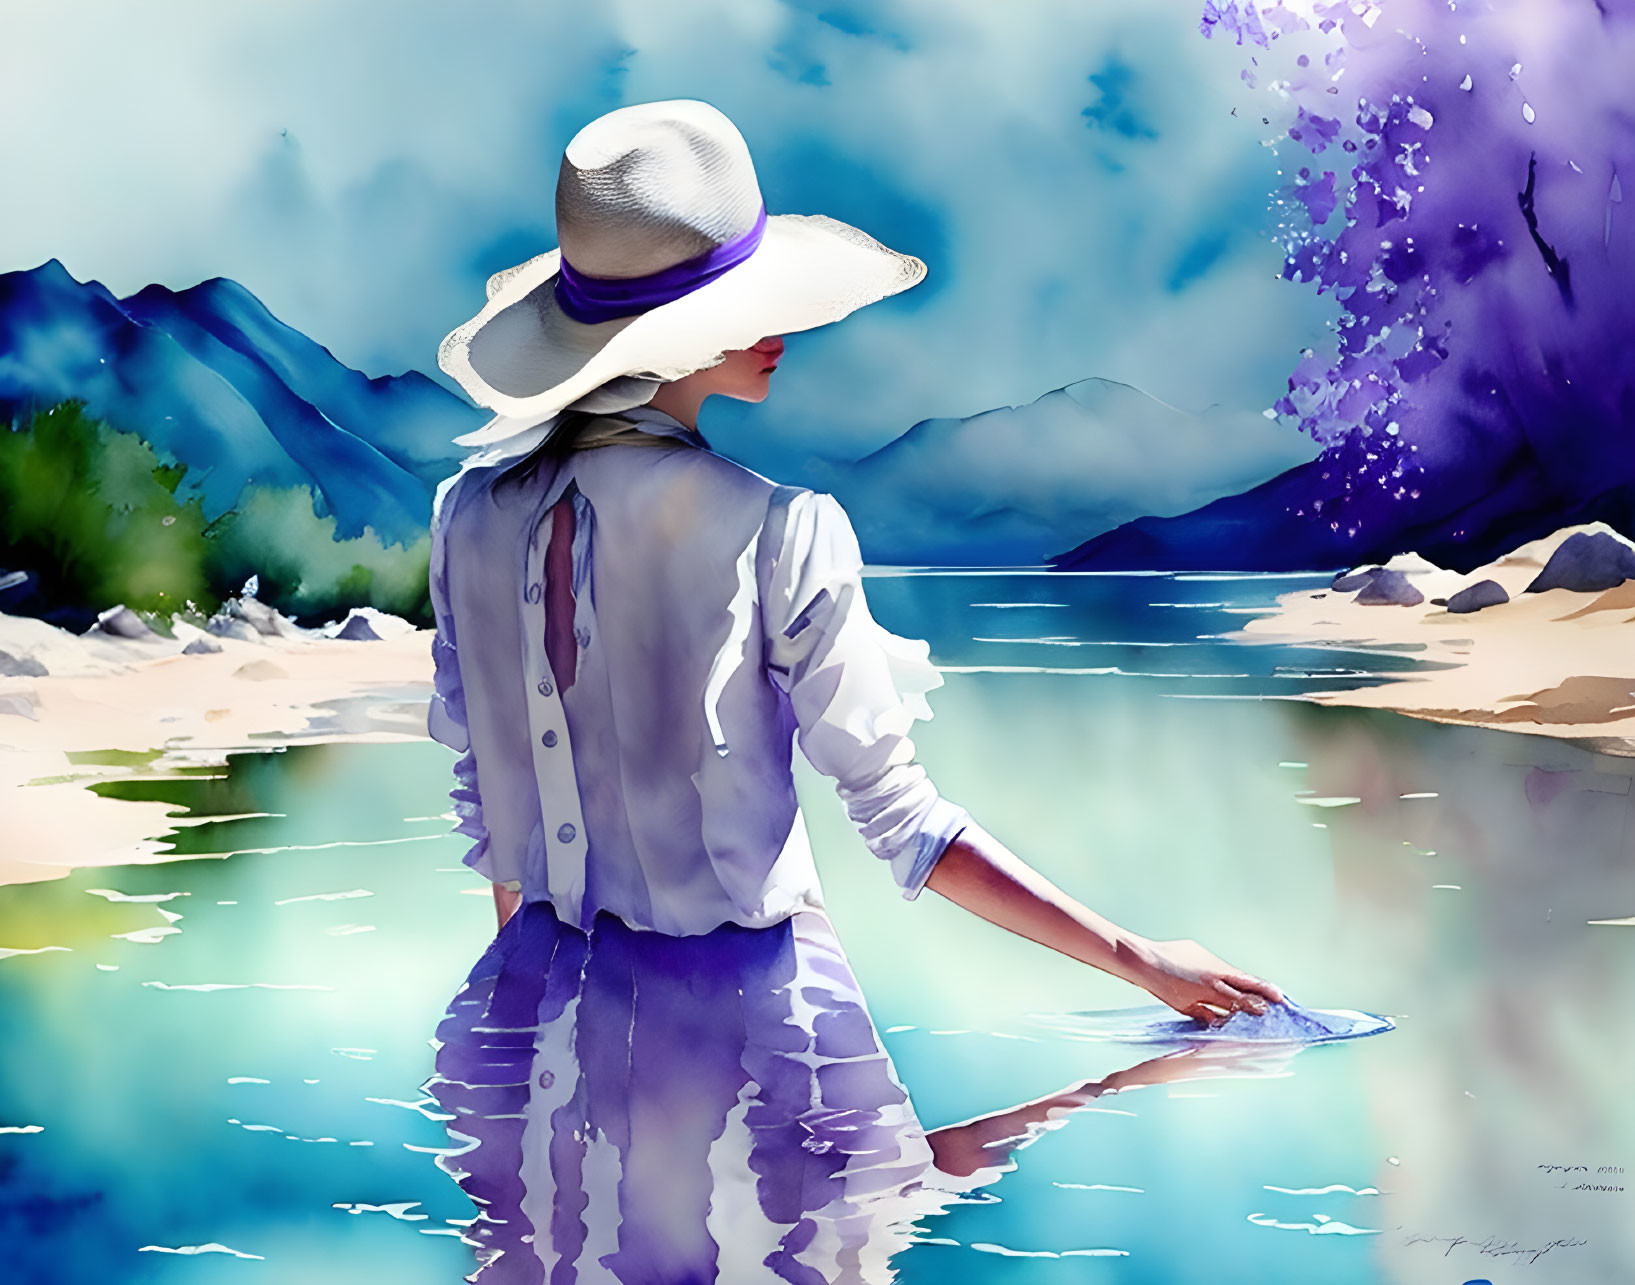 Woman in White Hat and Blue Dress by Lakeshore with Mountains and Purple Splash